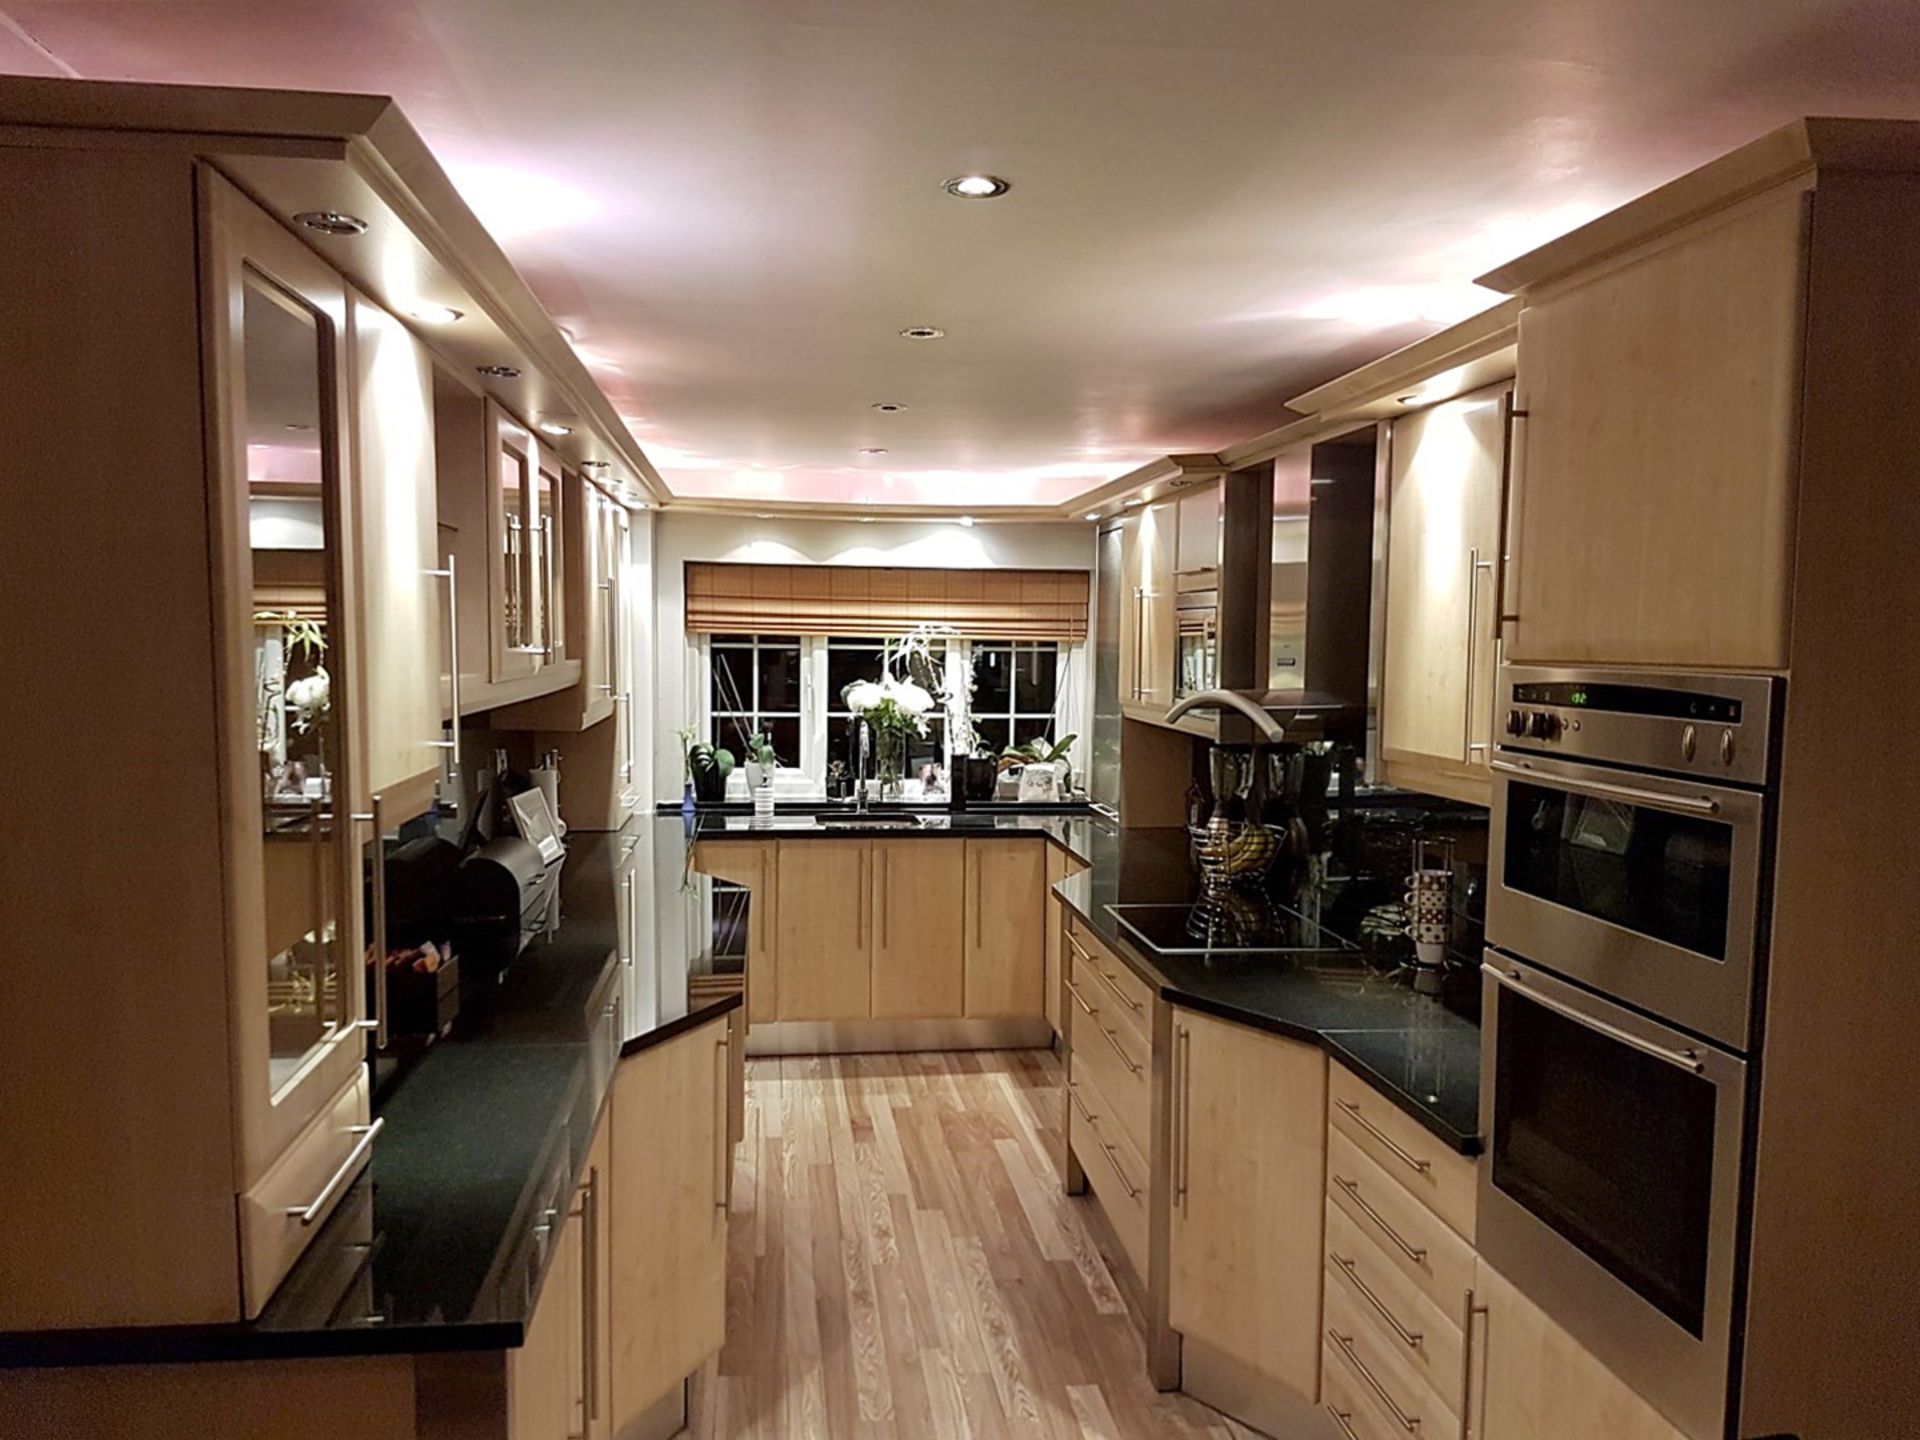 1 x Bespoke Fitted Kitchen With Granite Worktops And Integral NEFF Appliances - CL216 - Location: